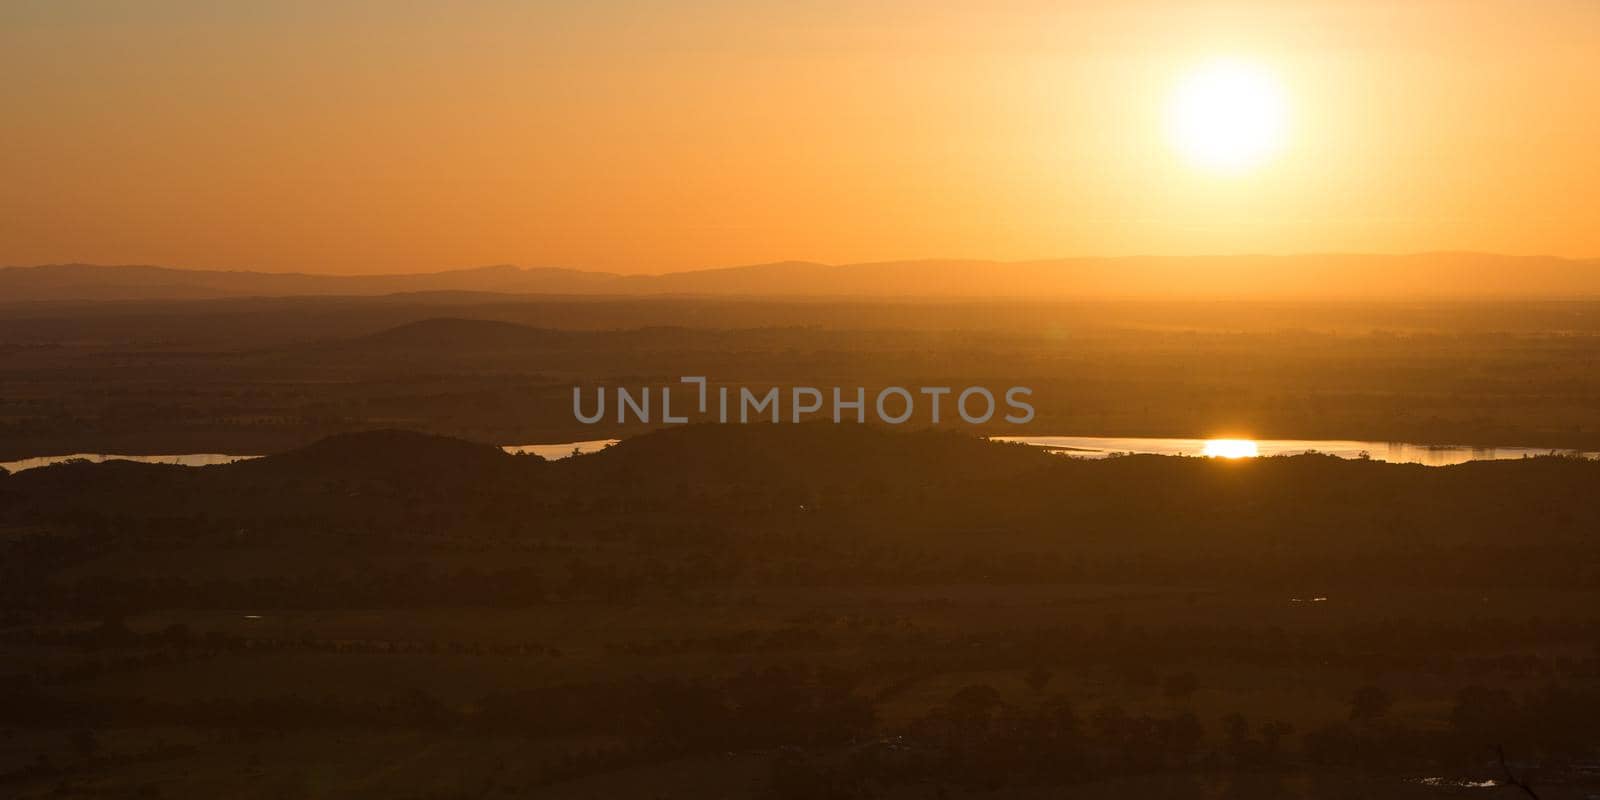 A view from Mt Tarrengower of the Moolort Plains near Maldon in Victoria, Australia